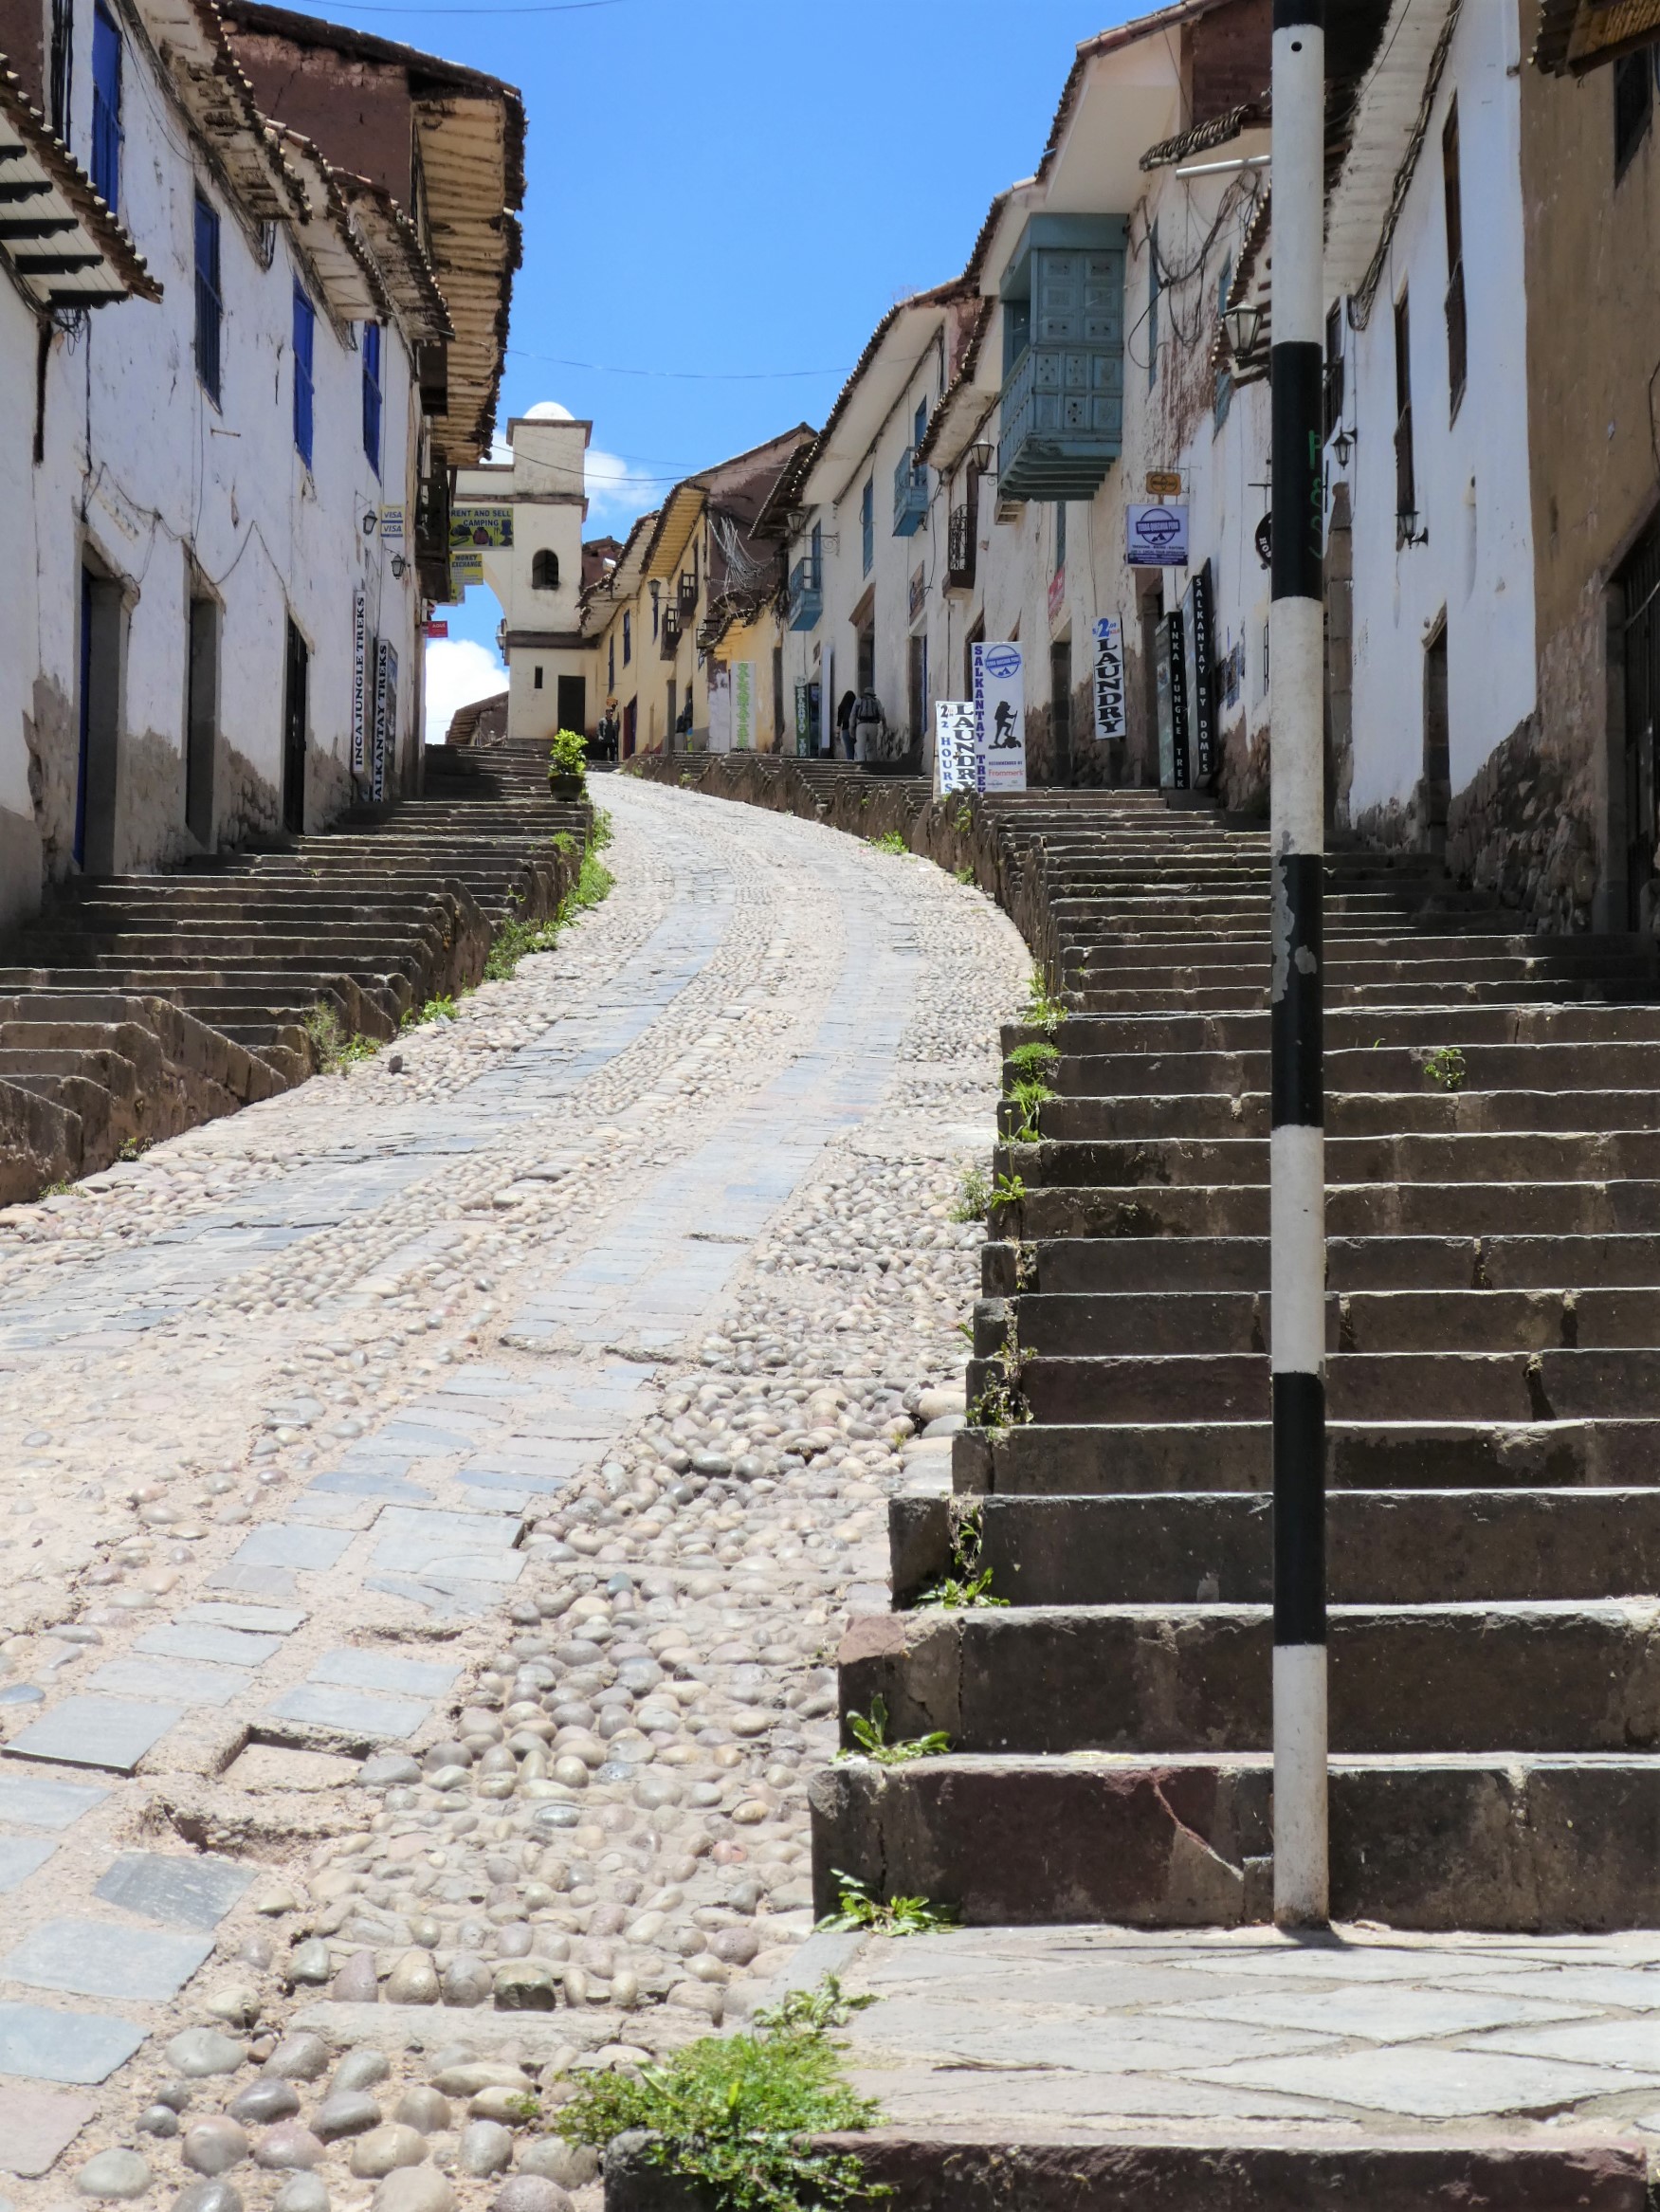 Stairs up to Arco de Santa Ana in Cusco